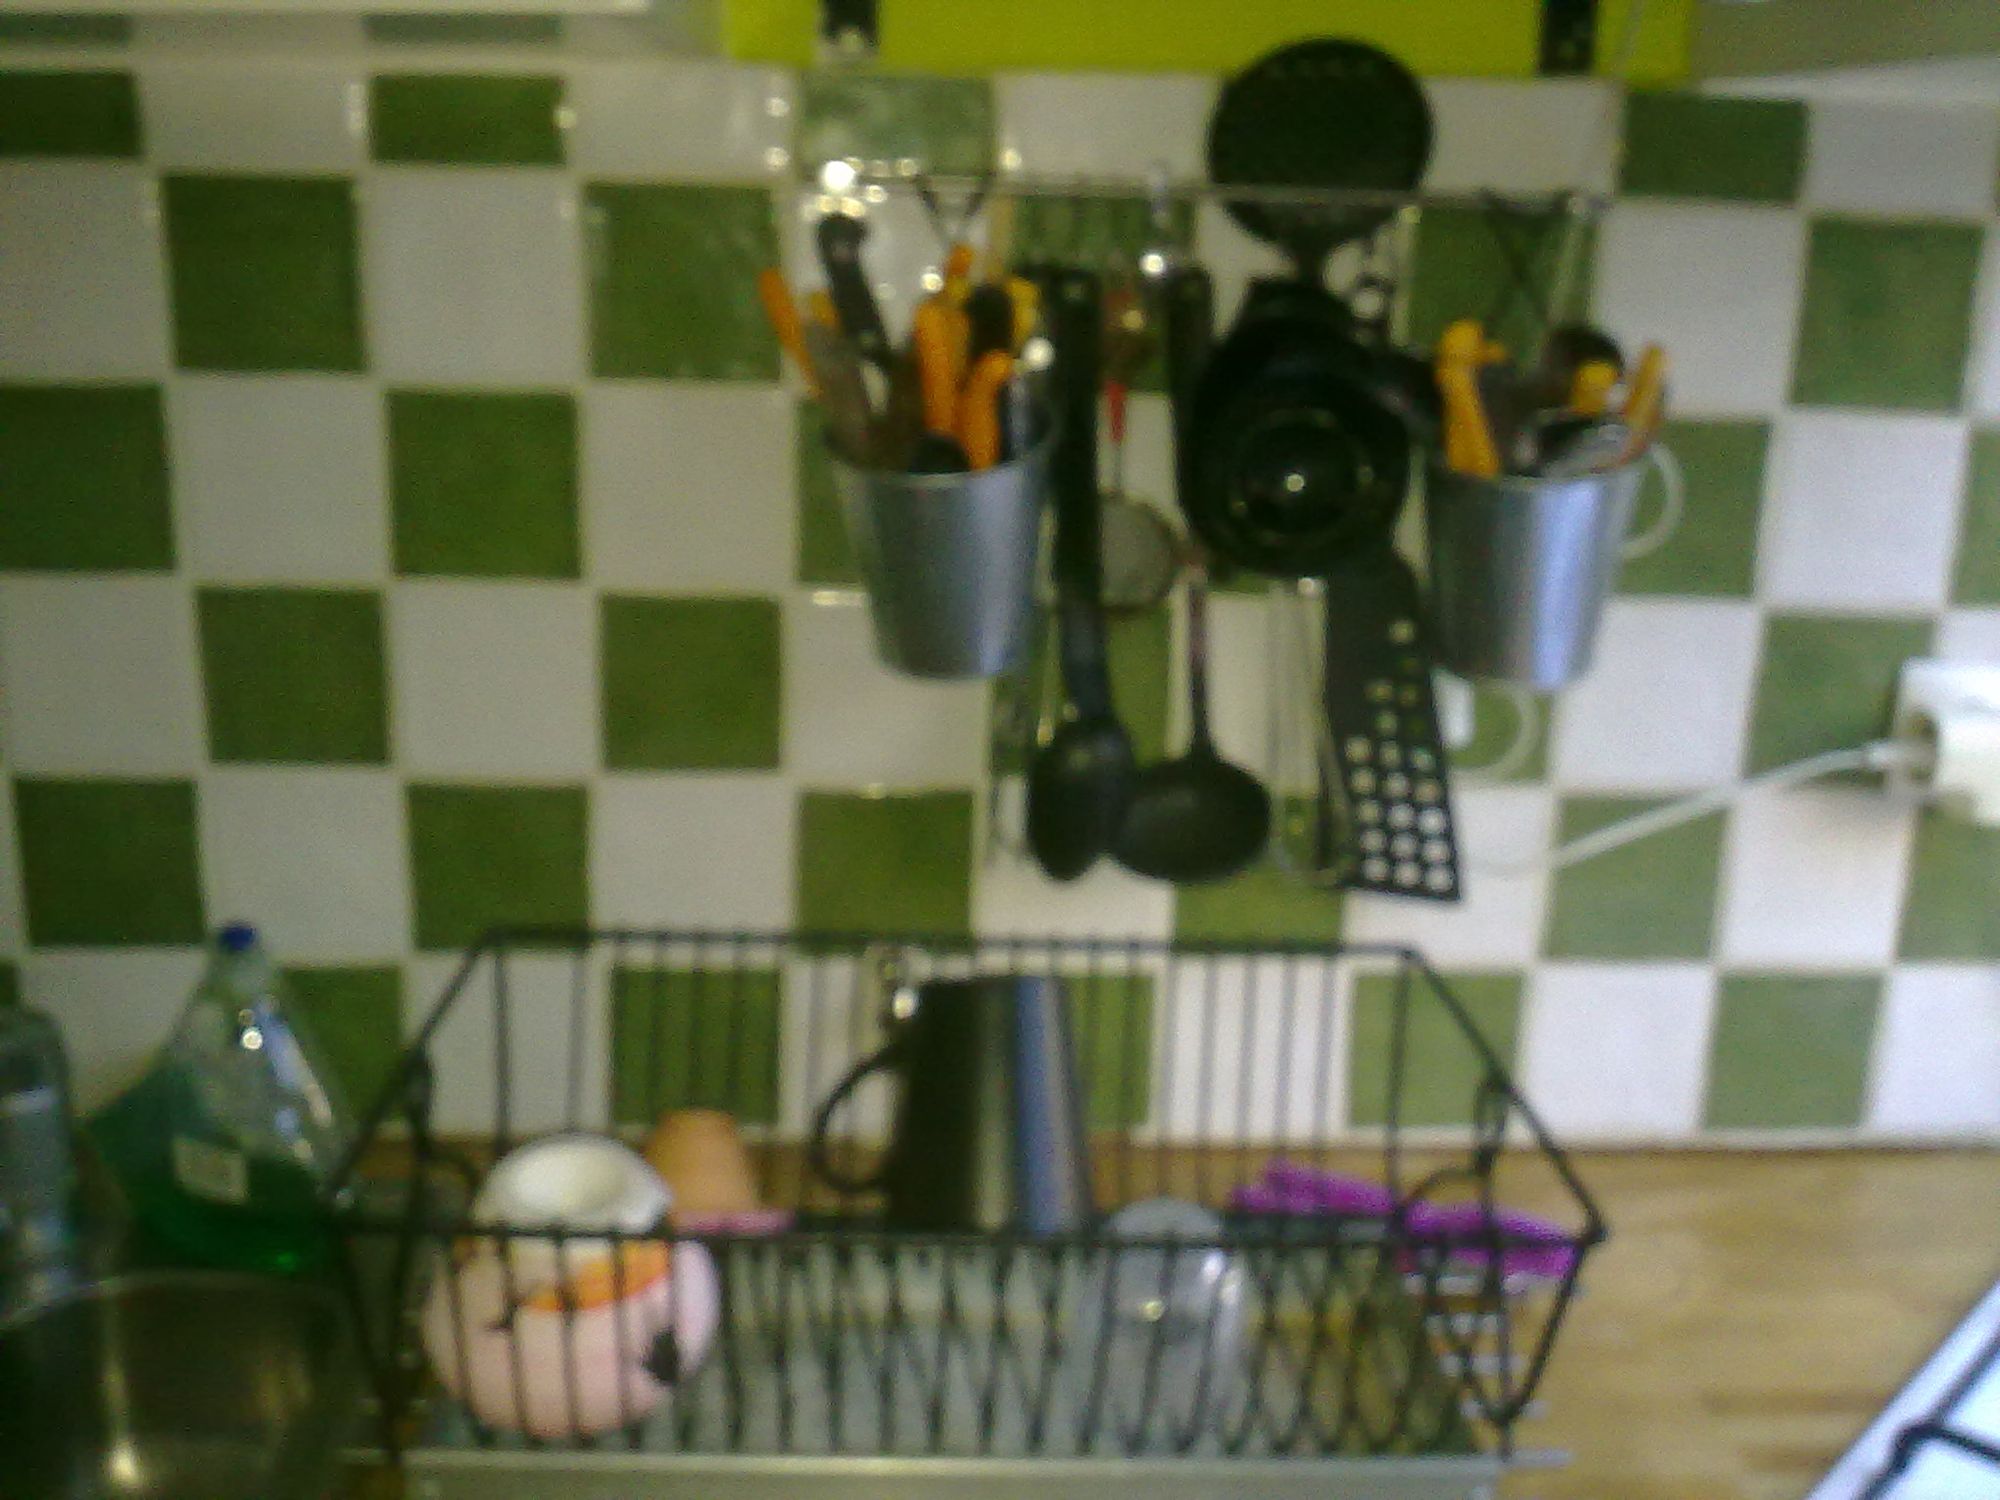 Old blurry photo of a kitchen